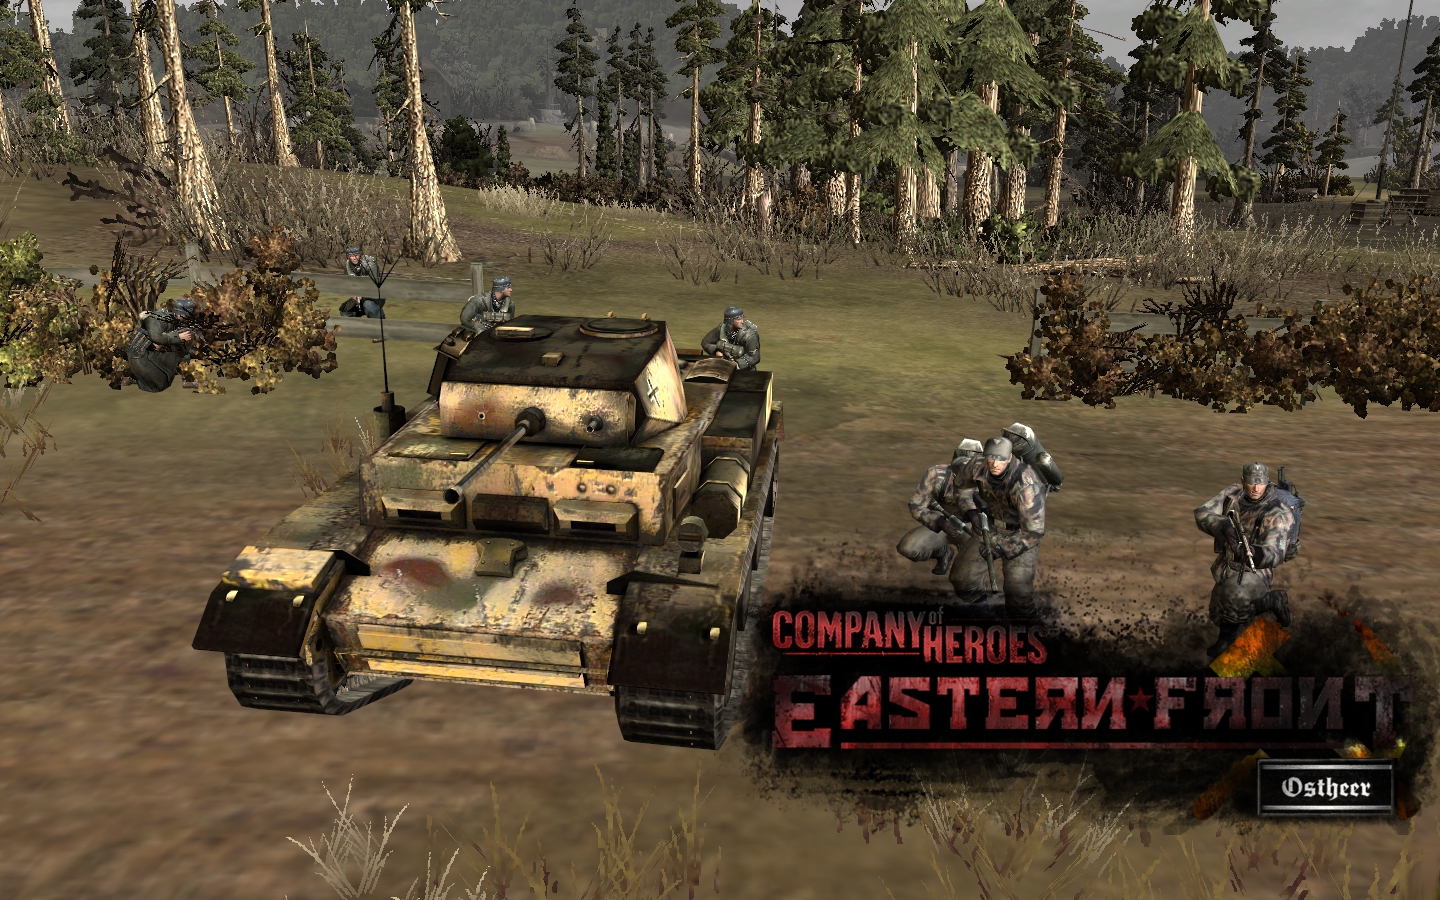 Company of heroes eastern front for steam фото 117